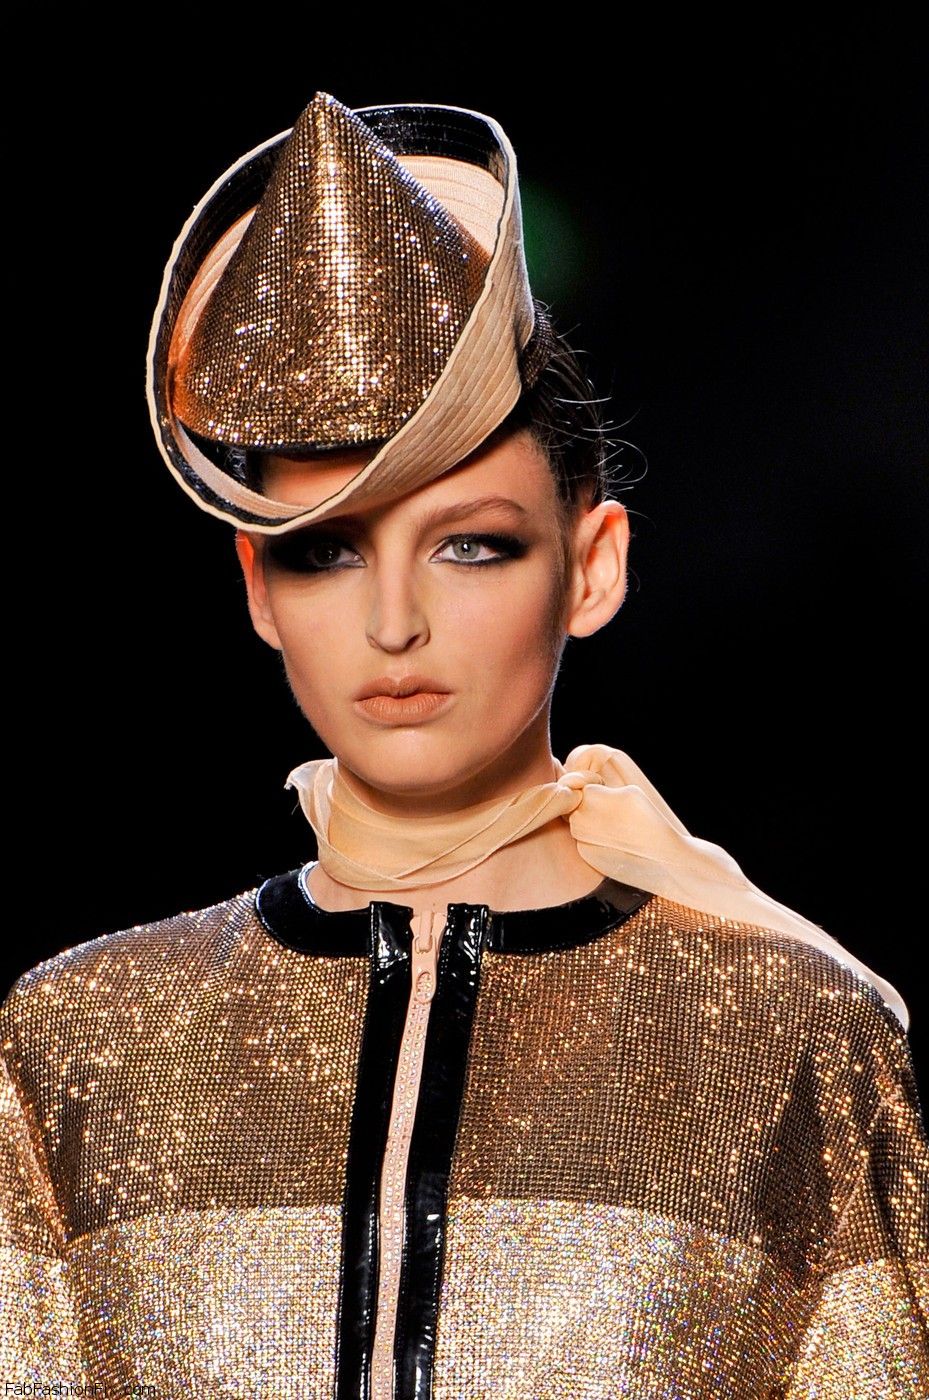 Jean Paul Gaultier Haute Couture Fall/Winter 2013-14 collection | Fab ...